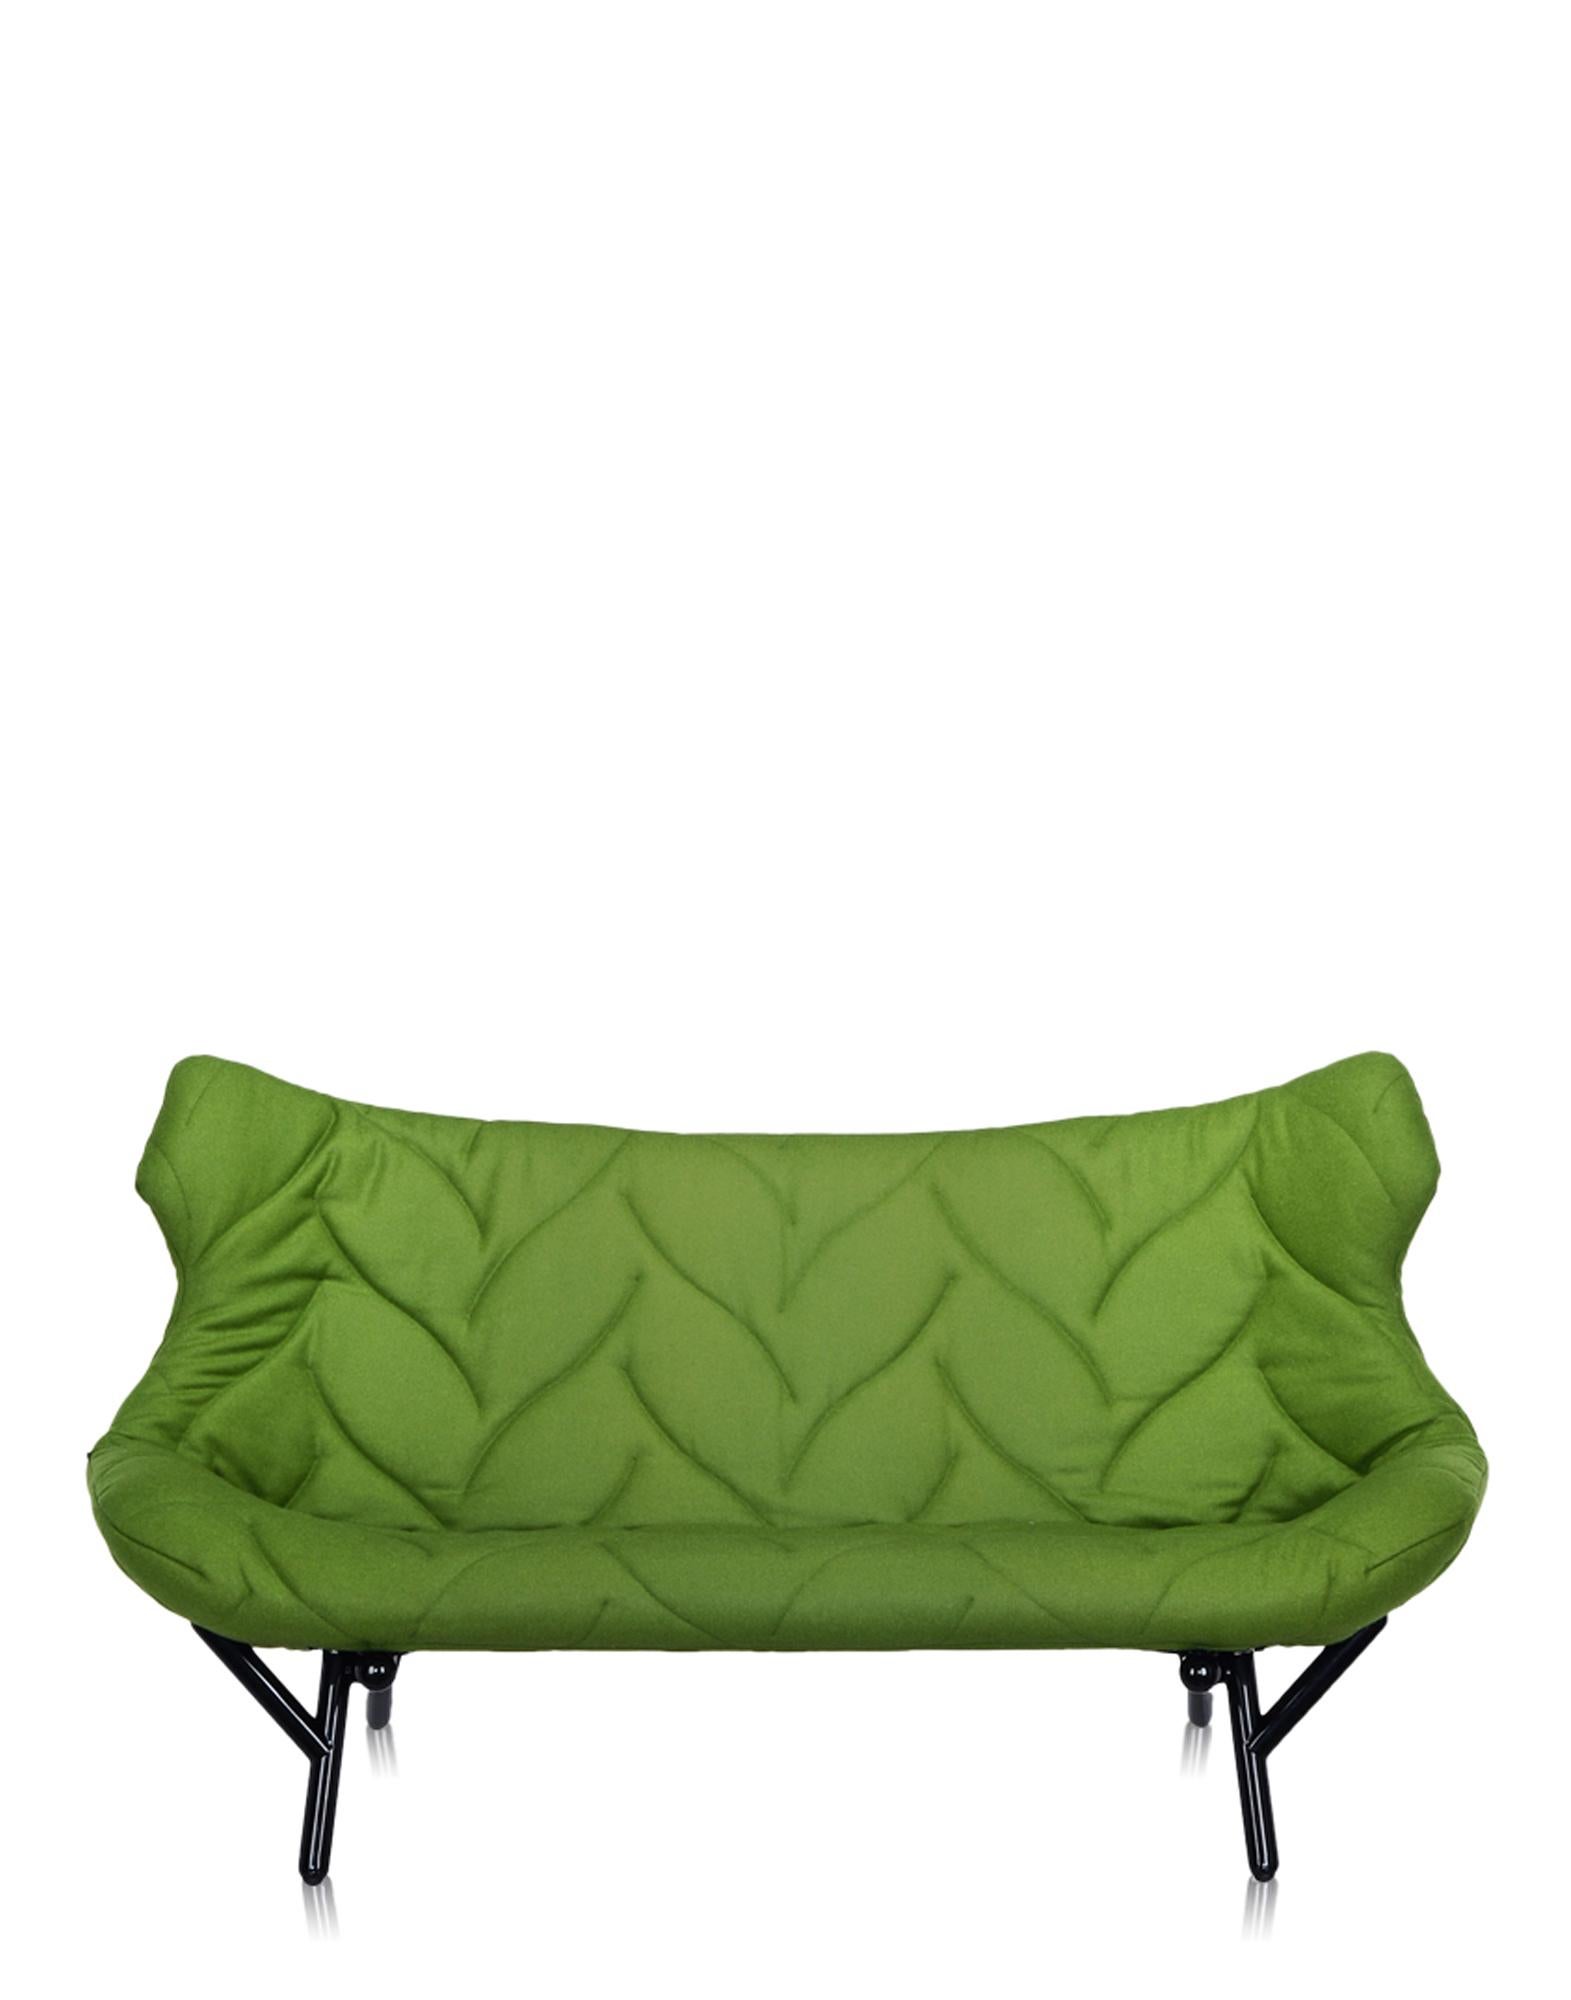 Kartell Foliage Sofa Trevira Green by Patricia Urquiola  In New Condition For Sale In Brooklyn, NY